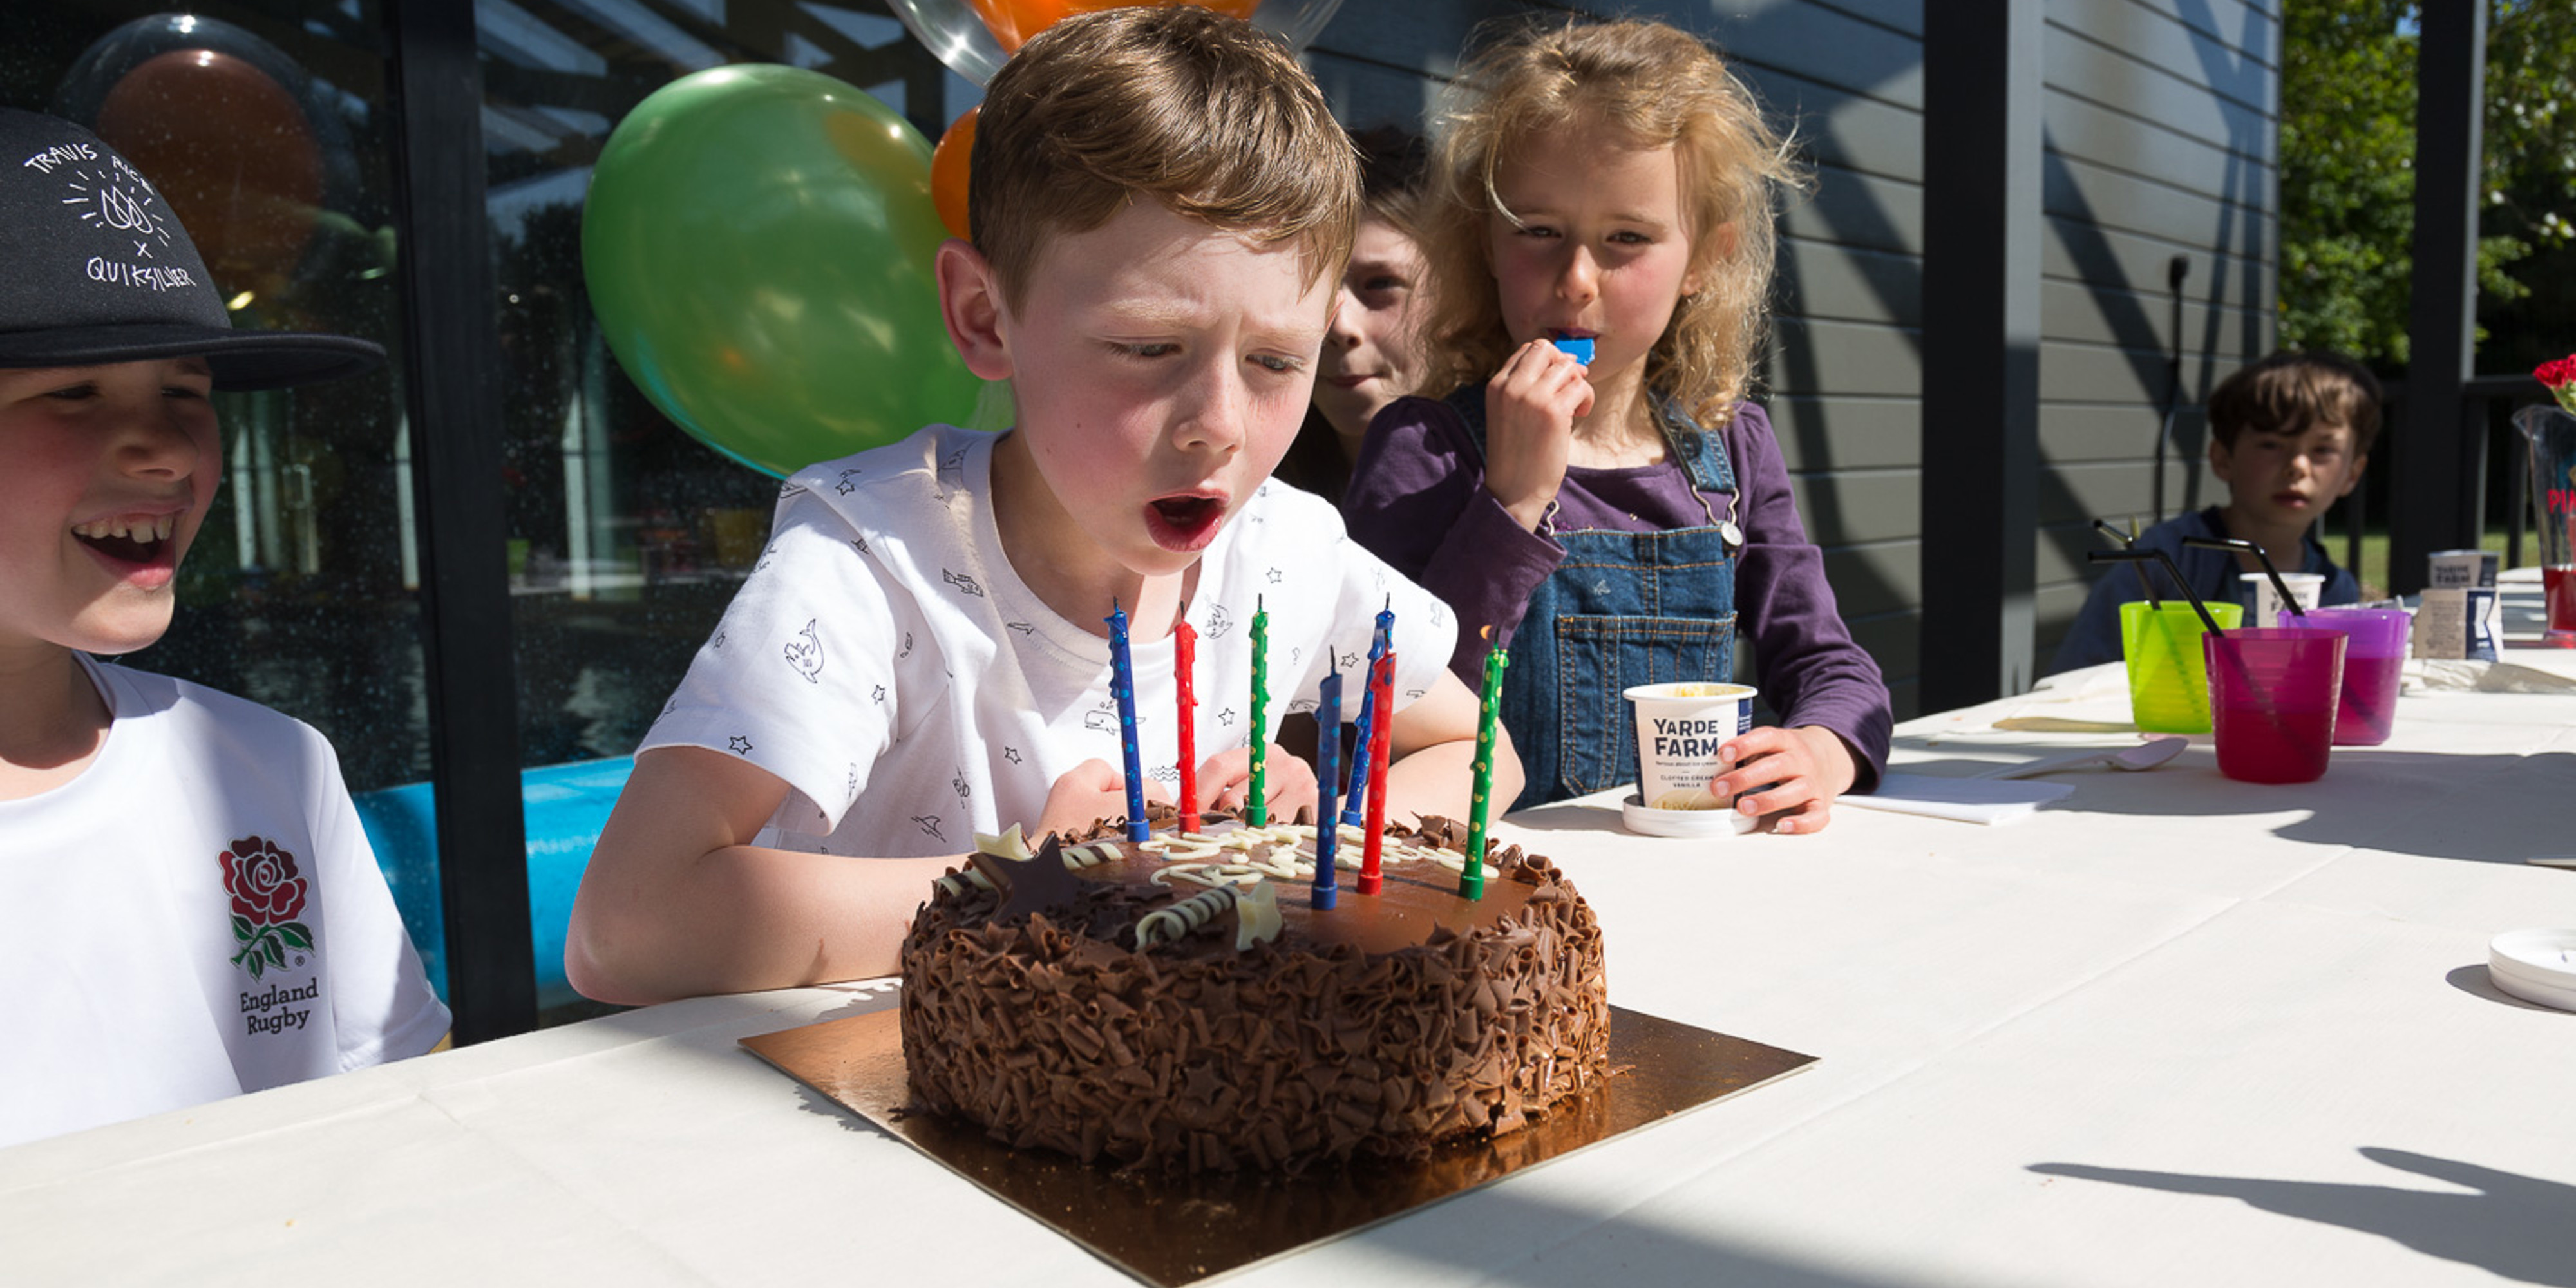 Boy blowing out birthday cake candles